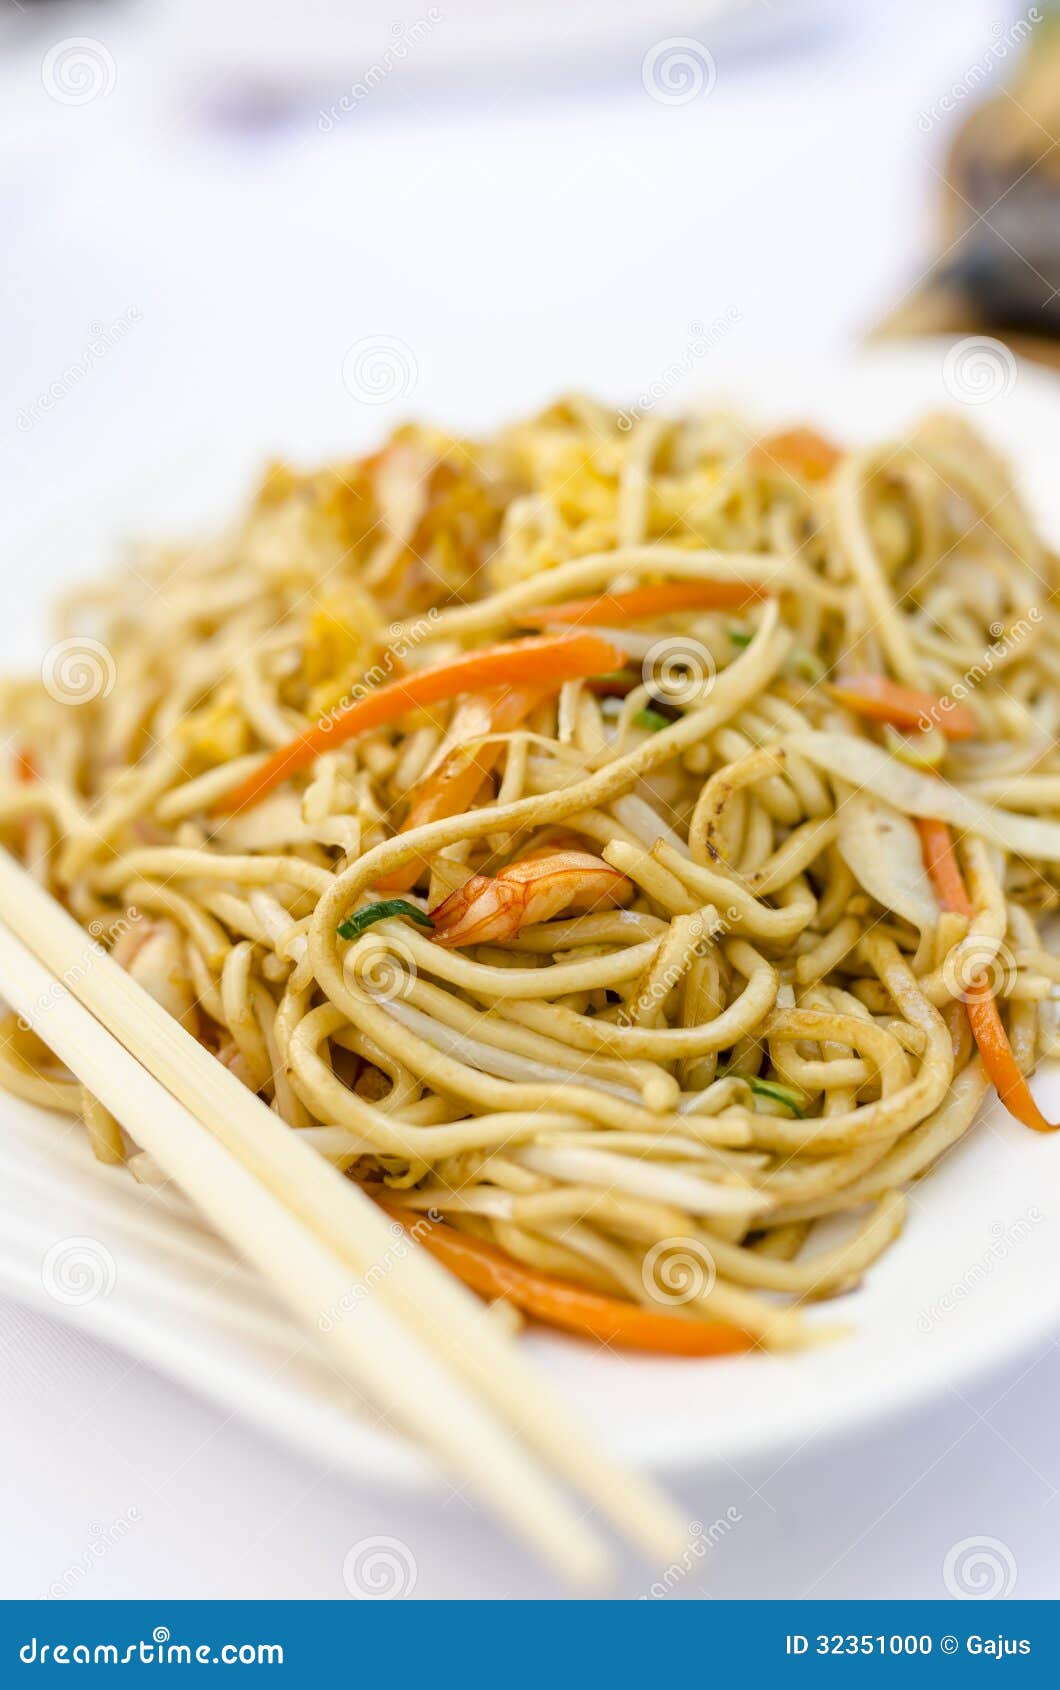 Stir fried chinese noodles stock photo. Image of vietnamese - 32351000